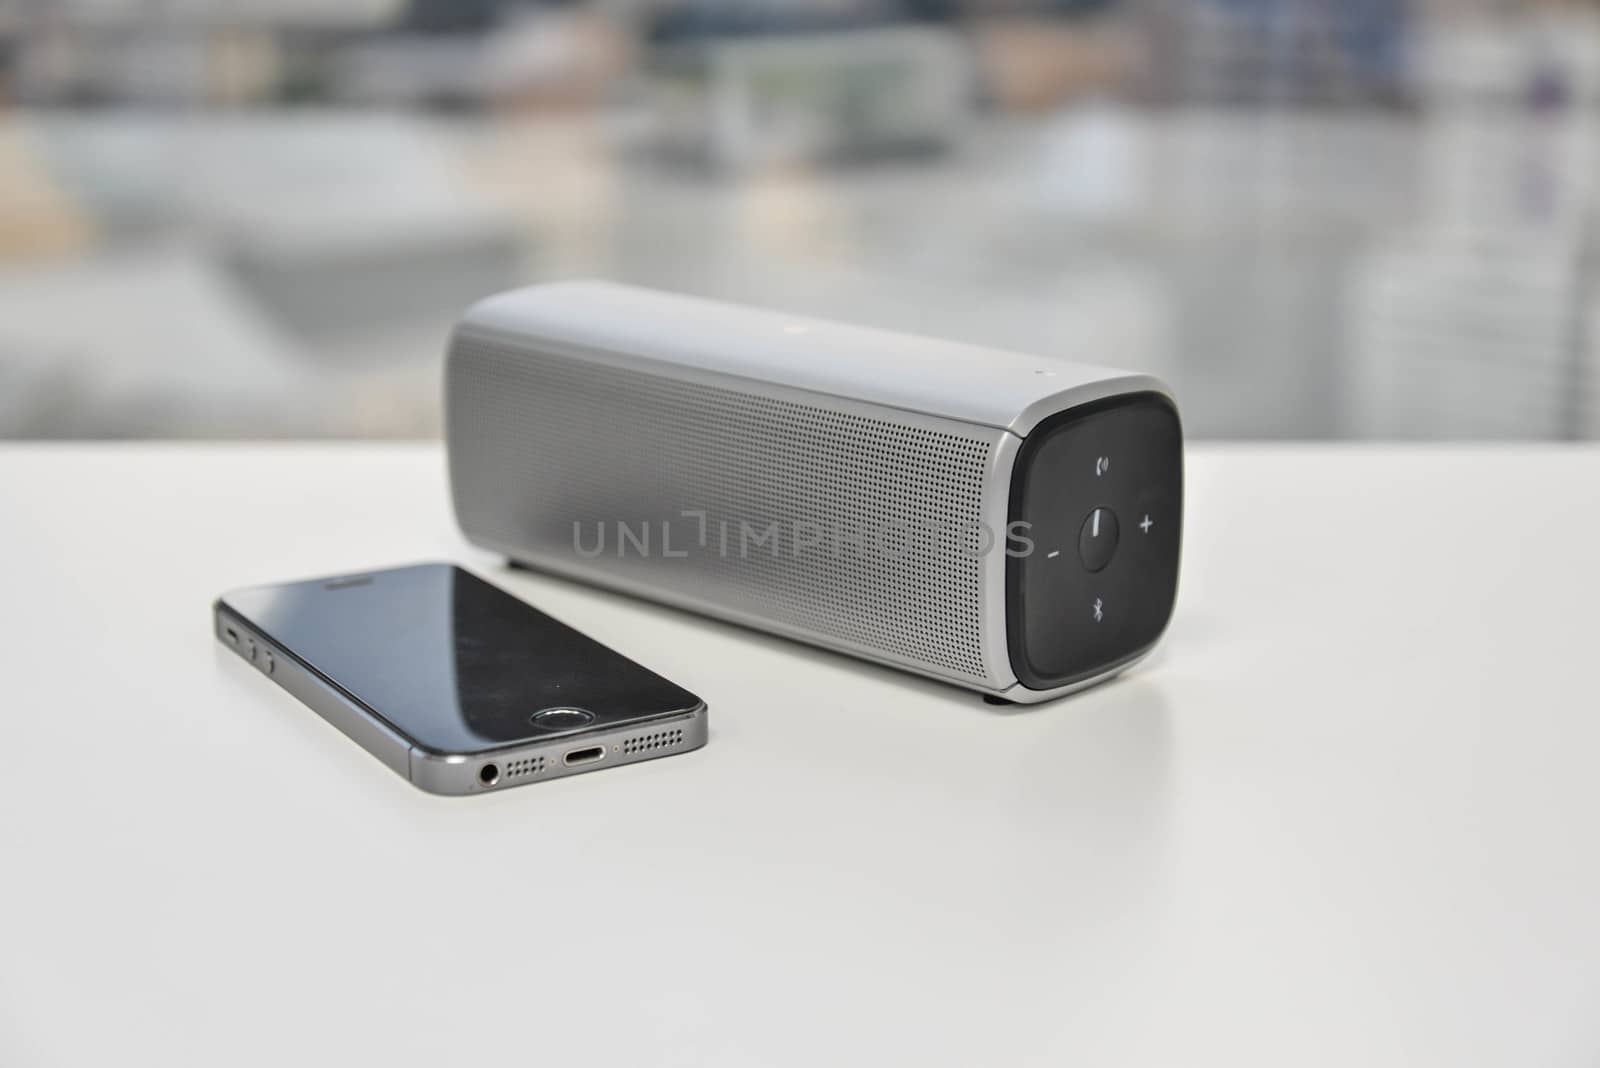 Bluetooth Speaker connected with mobile phone by Magneticmcc